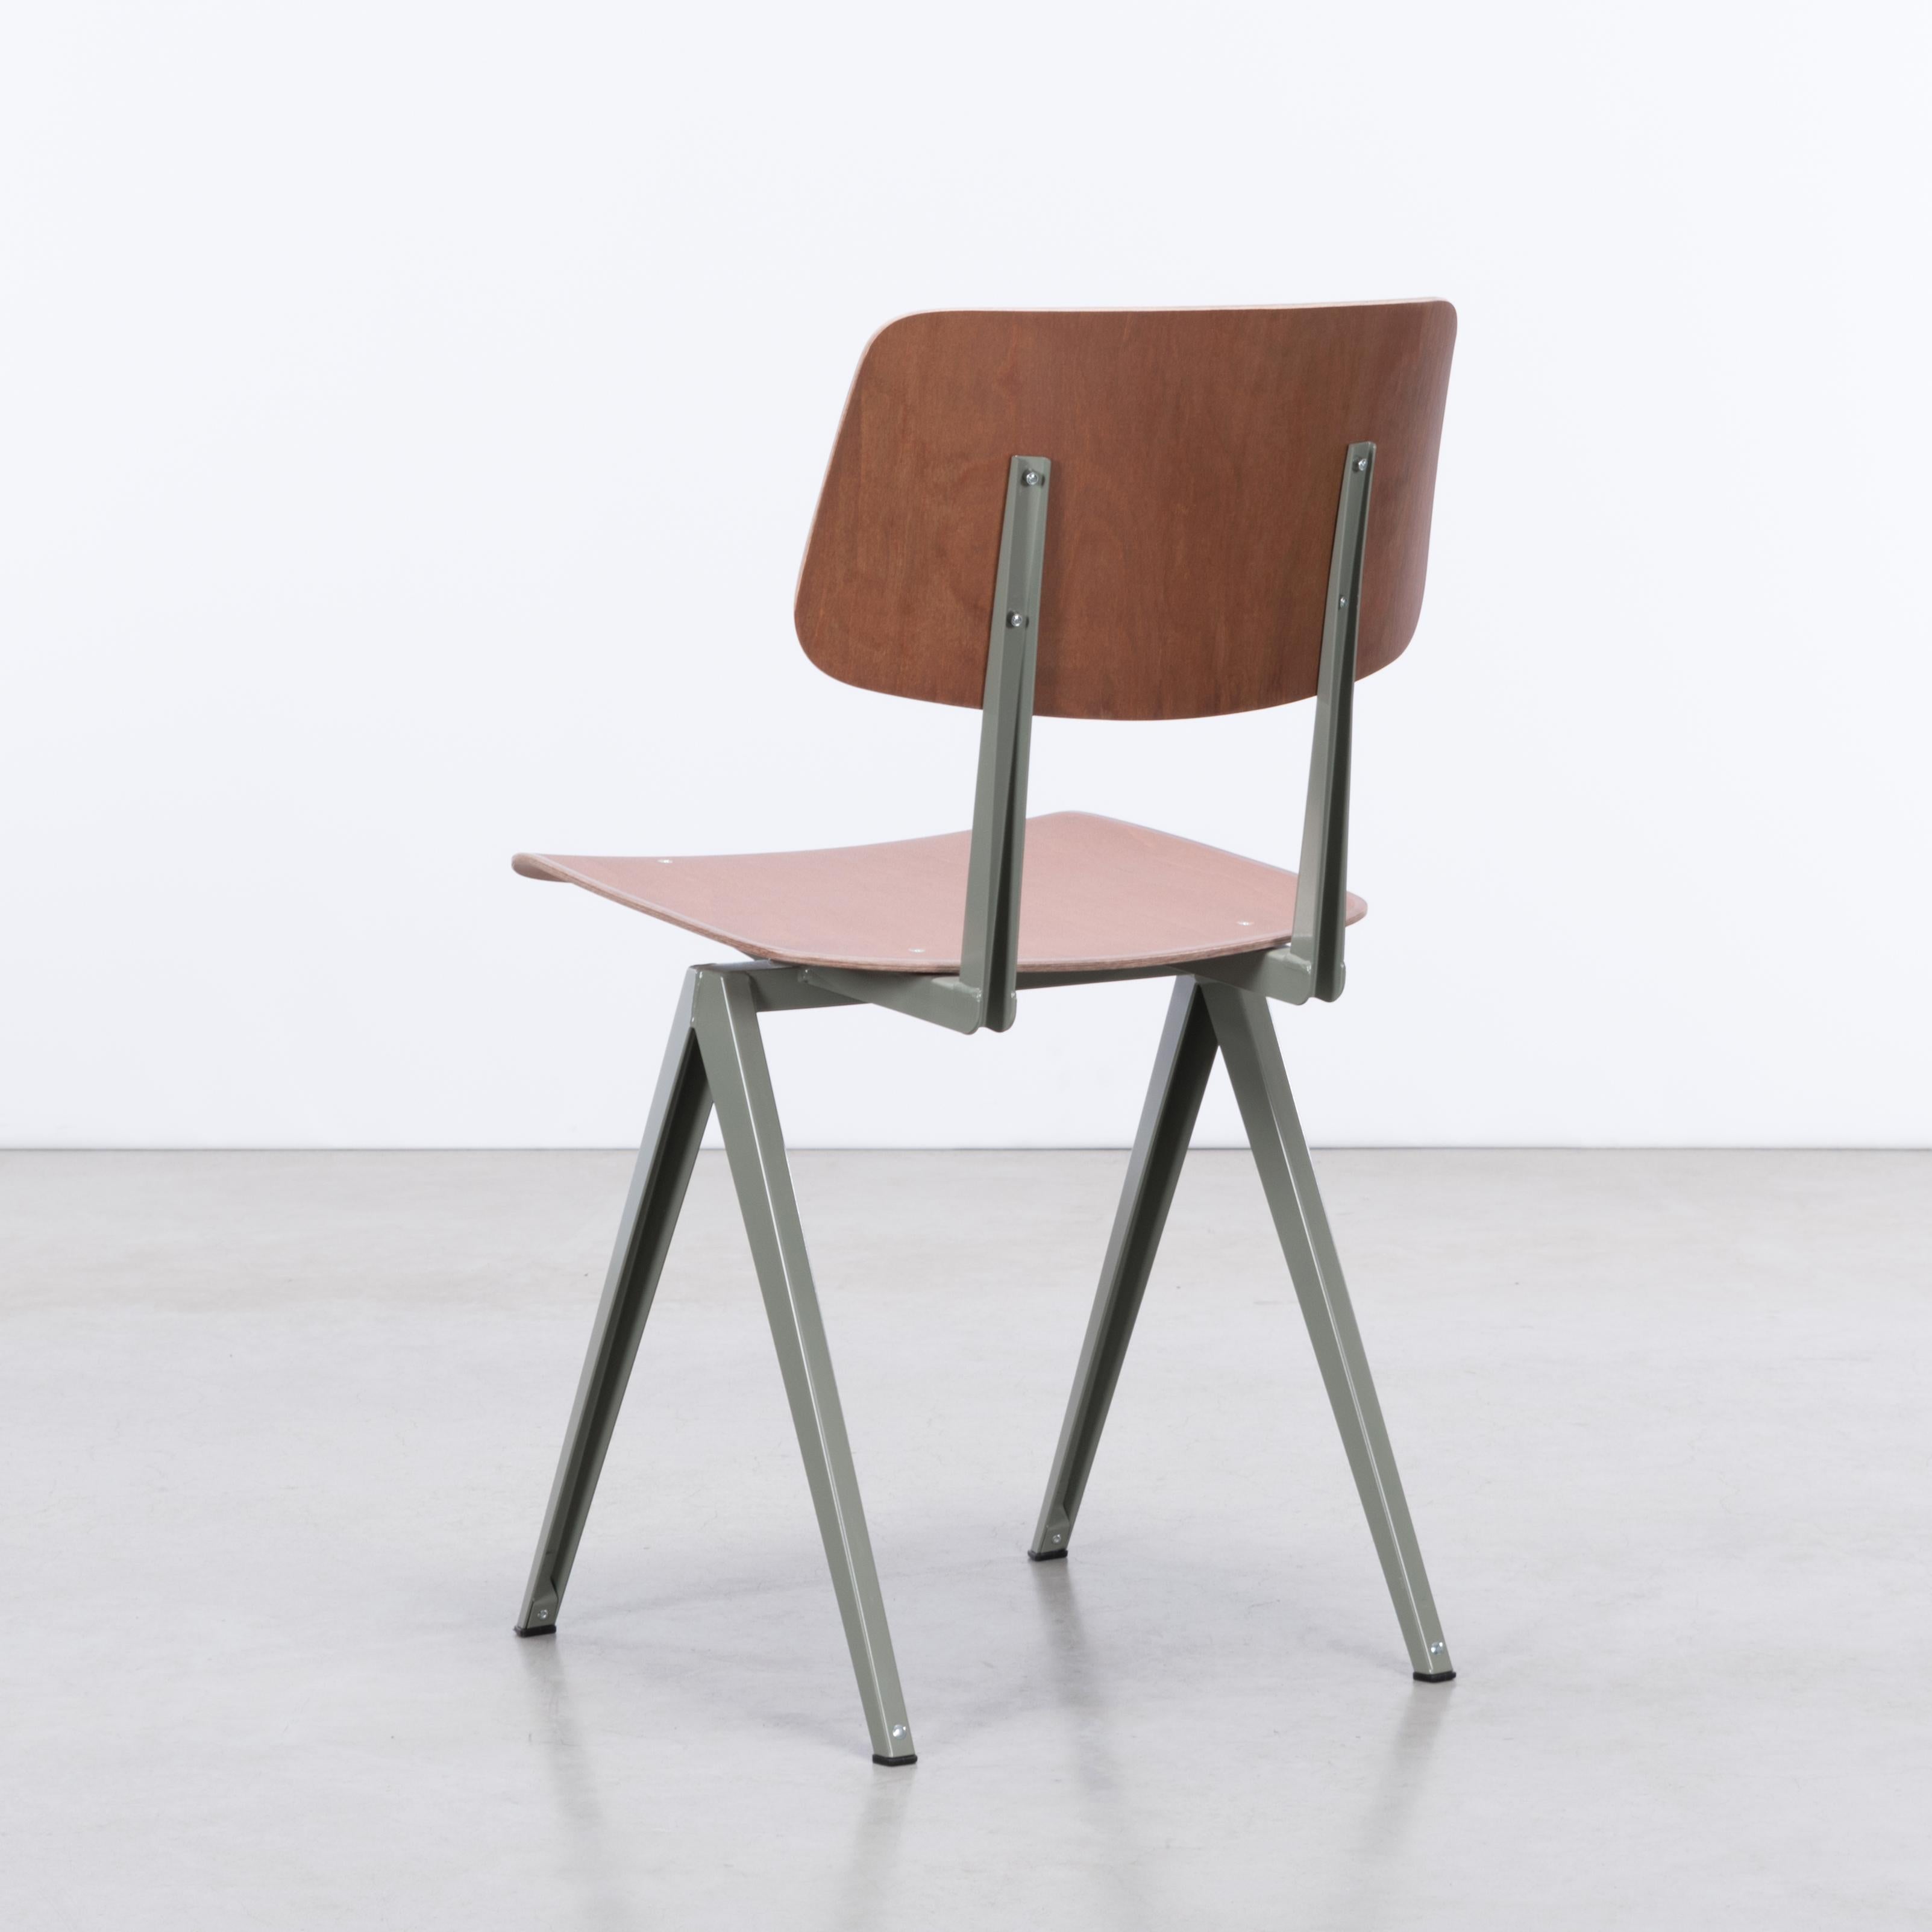 Plywood Multiple Industrial Galvanitas S16 Dining Chairs in Various Colors, Netherlands For Sale